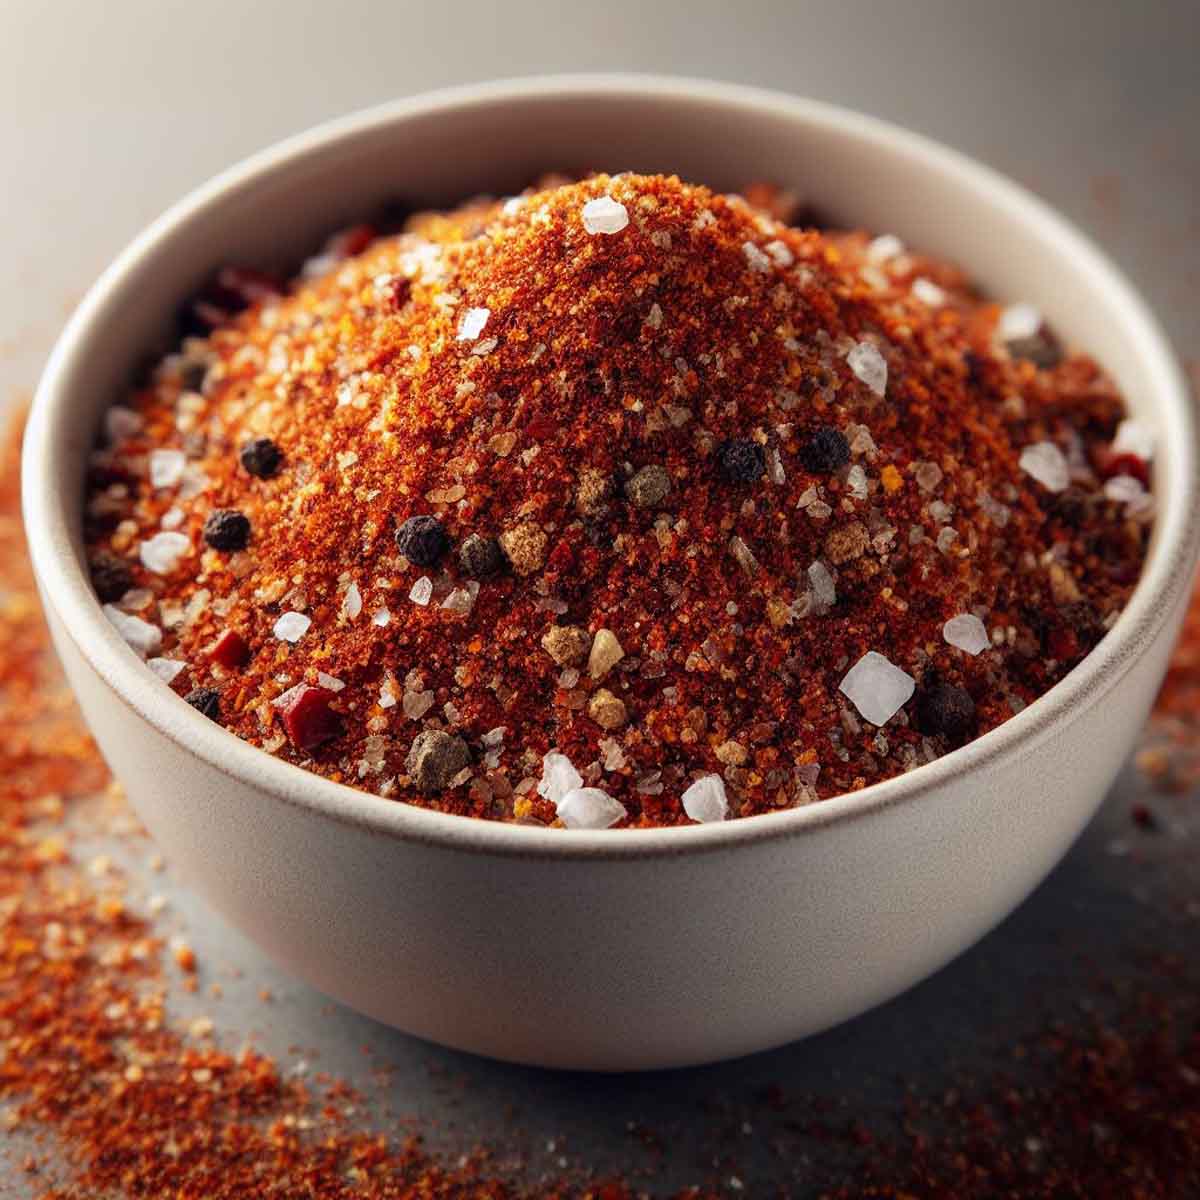 Close-up of a homemade dry rub mix with visible grains of brown sugar and spices.